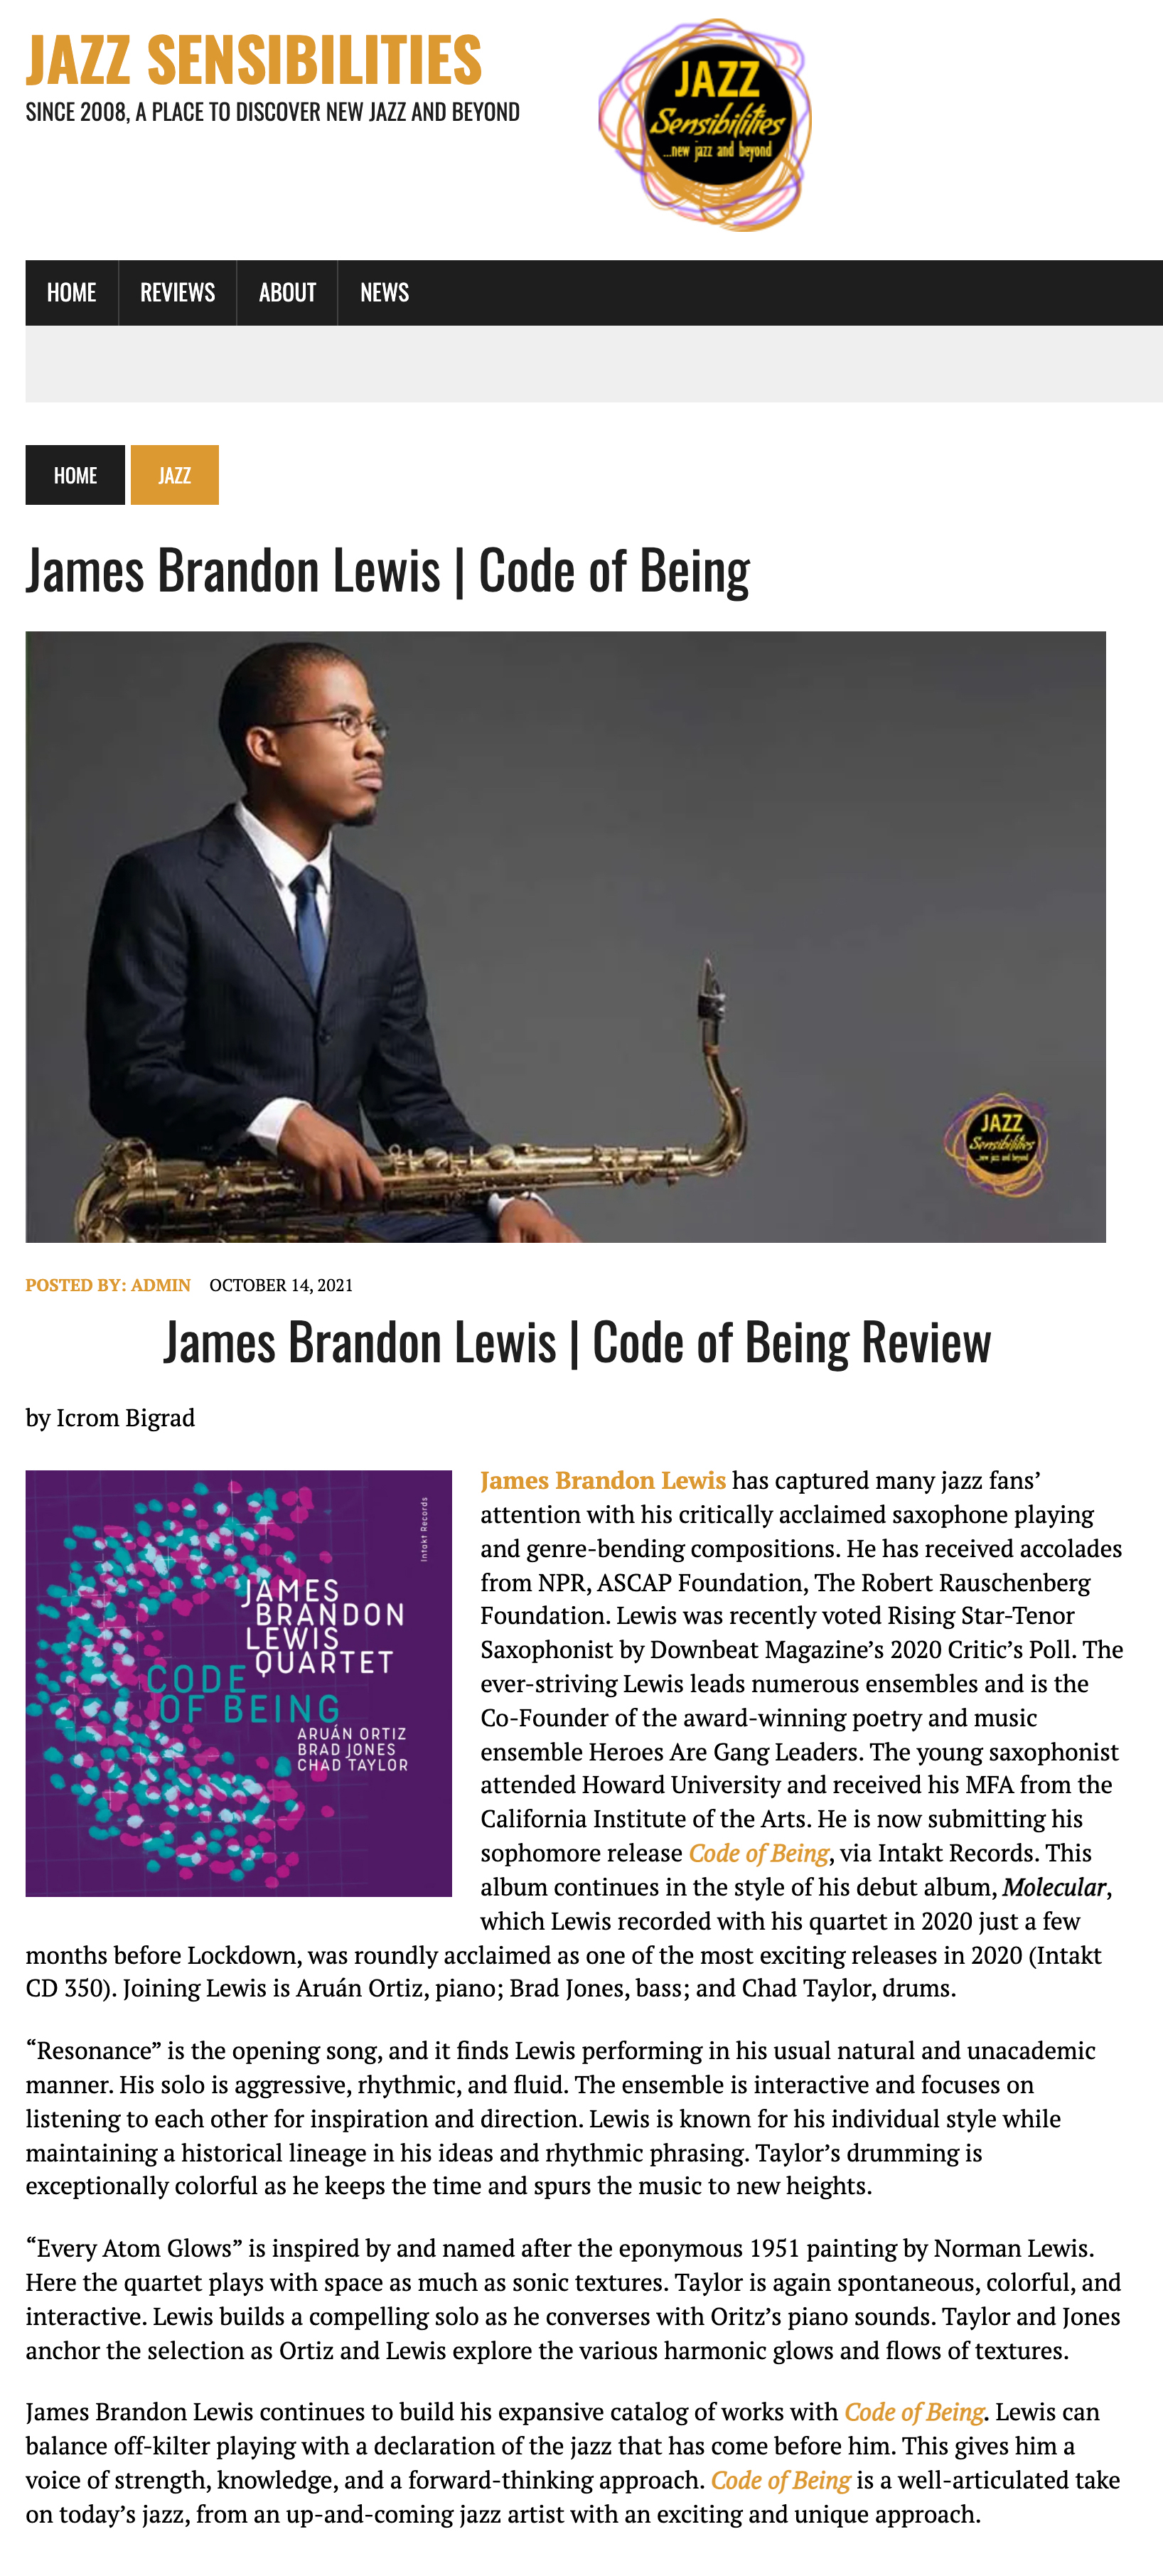 James Brandon Lewis has captured many jazz fans’ attention with his critically acclaimed saxophone playing and genre-bending compositions. He has received accolades from NPR, ASCAP Foundation, The Robert Rauschenberg Foundation. Lewis was recently voted Rising Star-Tenor Saxophonist by Downbeat Magazine’s 2020 Critic’s Poll. The ever-striving Lewis leads numerous ensembles and is the Co-Founder of the award-winning poetry and music ensemble Heroes Are Gang Leaders. The young saxophonist attended Howard University and received his MFA from the California Institute of the Arts. He is now submitting his sophomore release Code of Being, via Intakt Records. This album continues in the style of his debut album, Molecular, which Lewis recorded with his quartet in 2020 just a few months before Lockdown, was roundly acclaimed as one of the most exciting releases in 2020 (Intakt CD 350). Joining Lewis is Aruán Ortiz, piano; Brad Jones, bass; and Chad Taylor, drums.